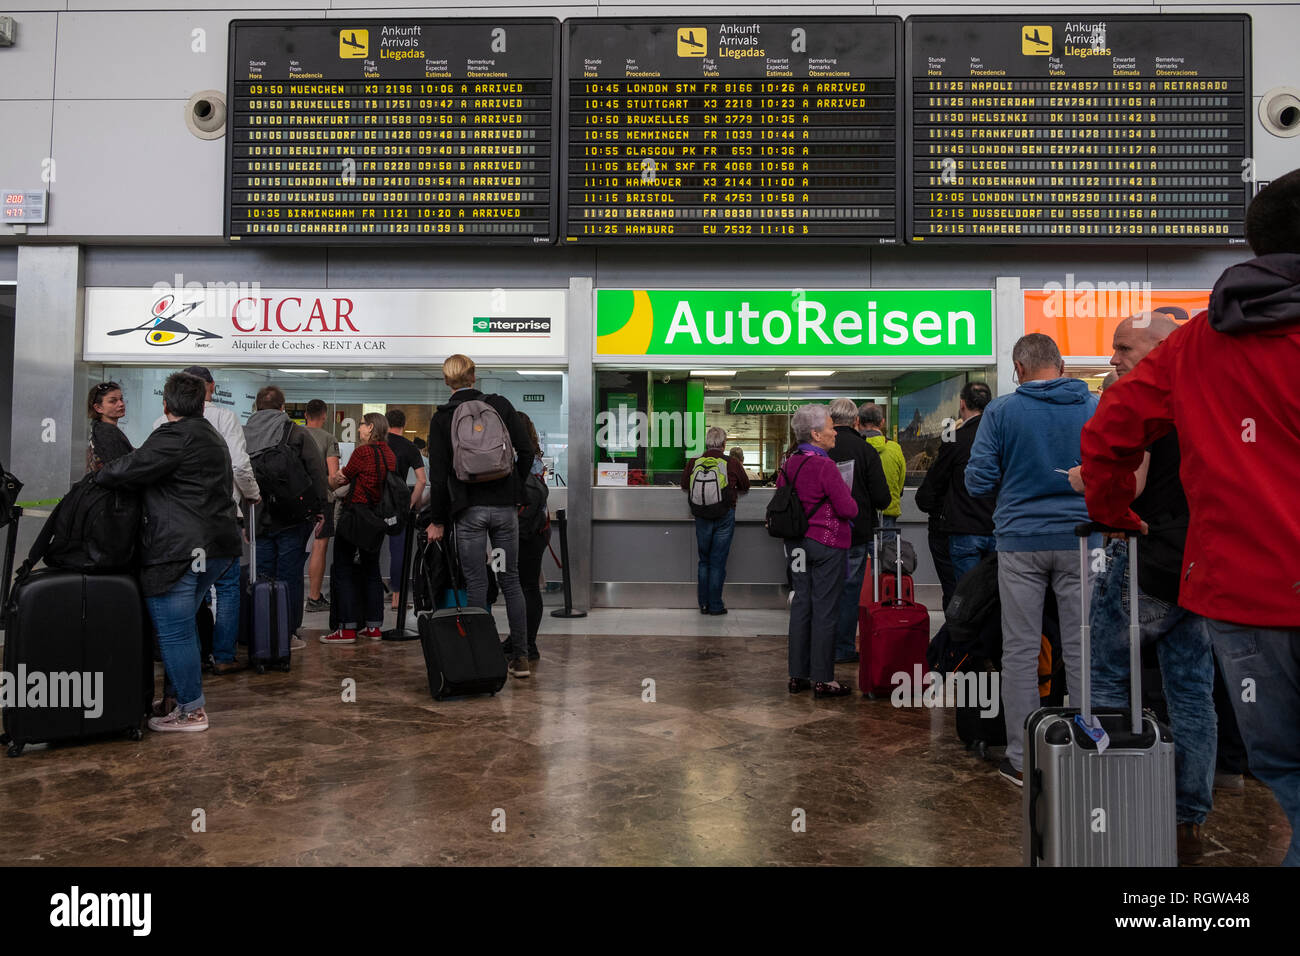 Cicar and Autoreisen car rental office, counter, at Tenerife south airport arrivals area, Canary Islands, Spain Stock Photo